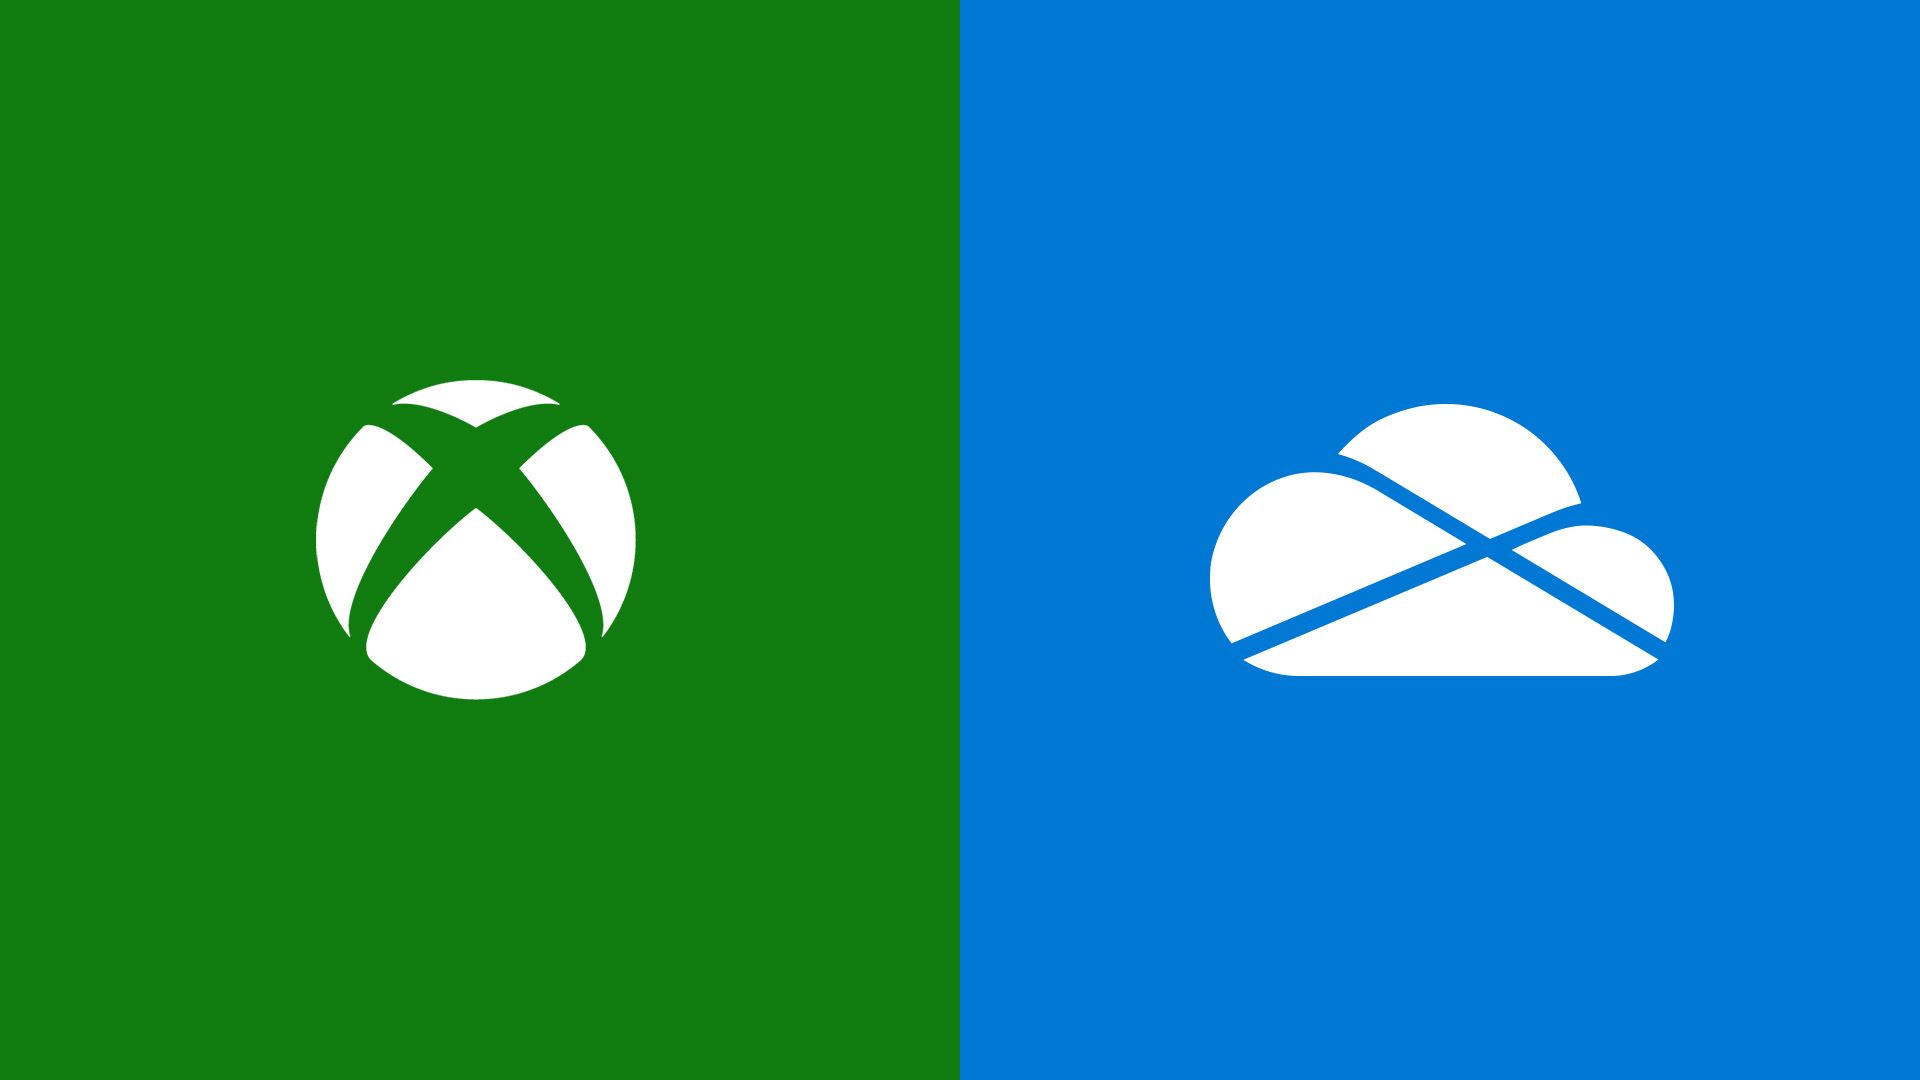 Xbox and OneDrive